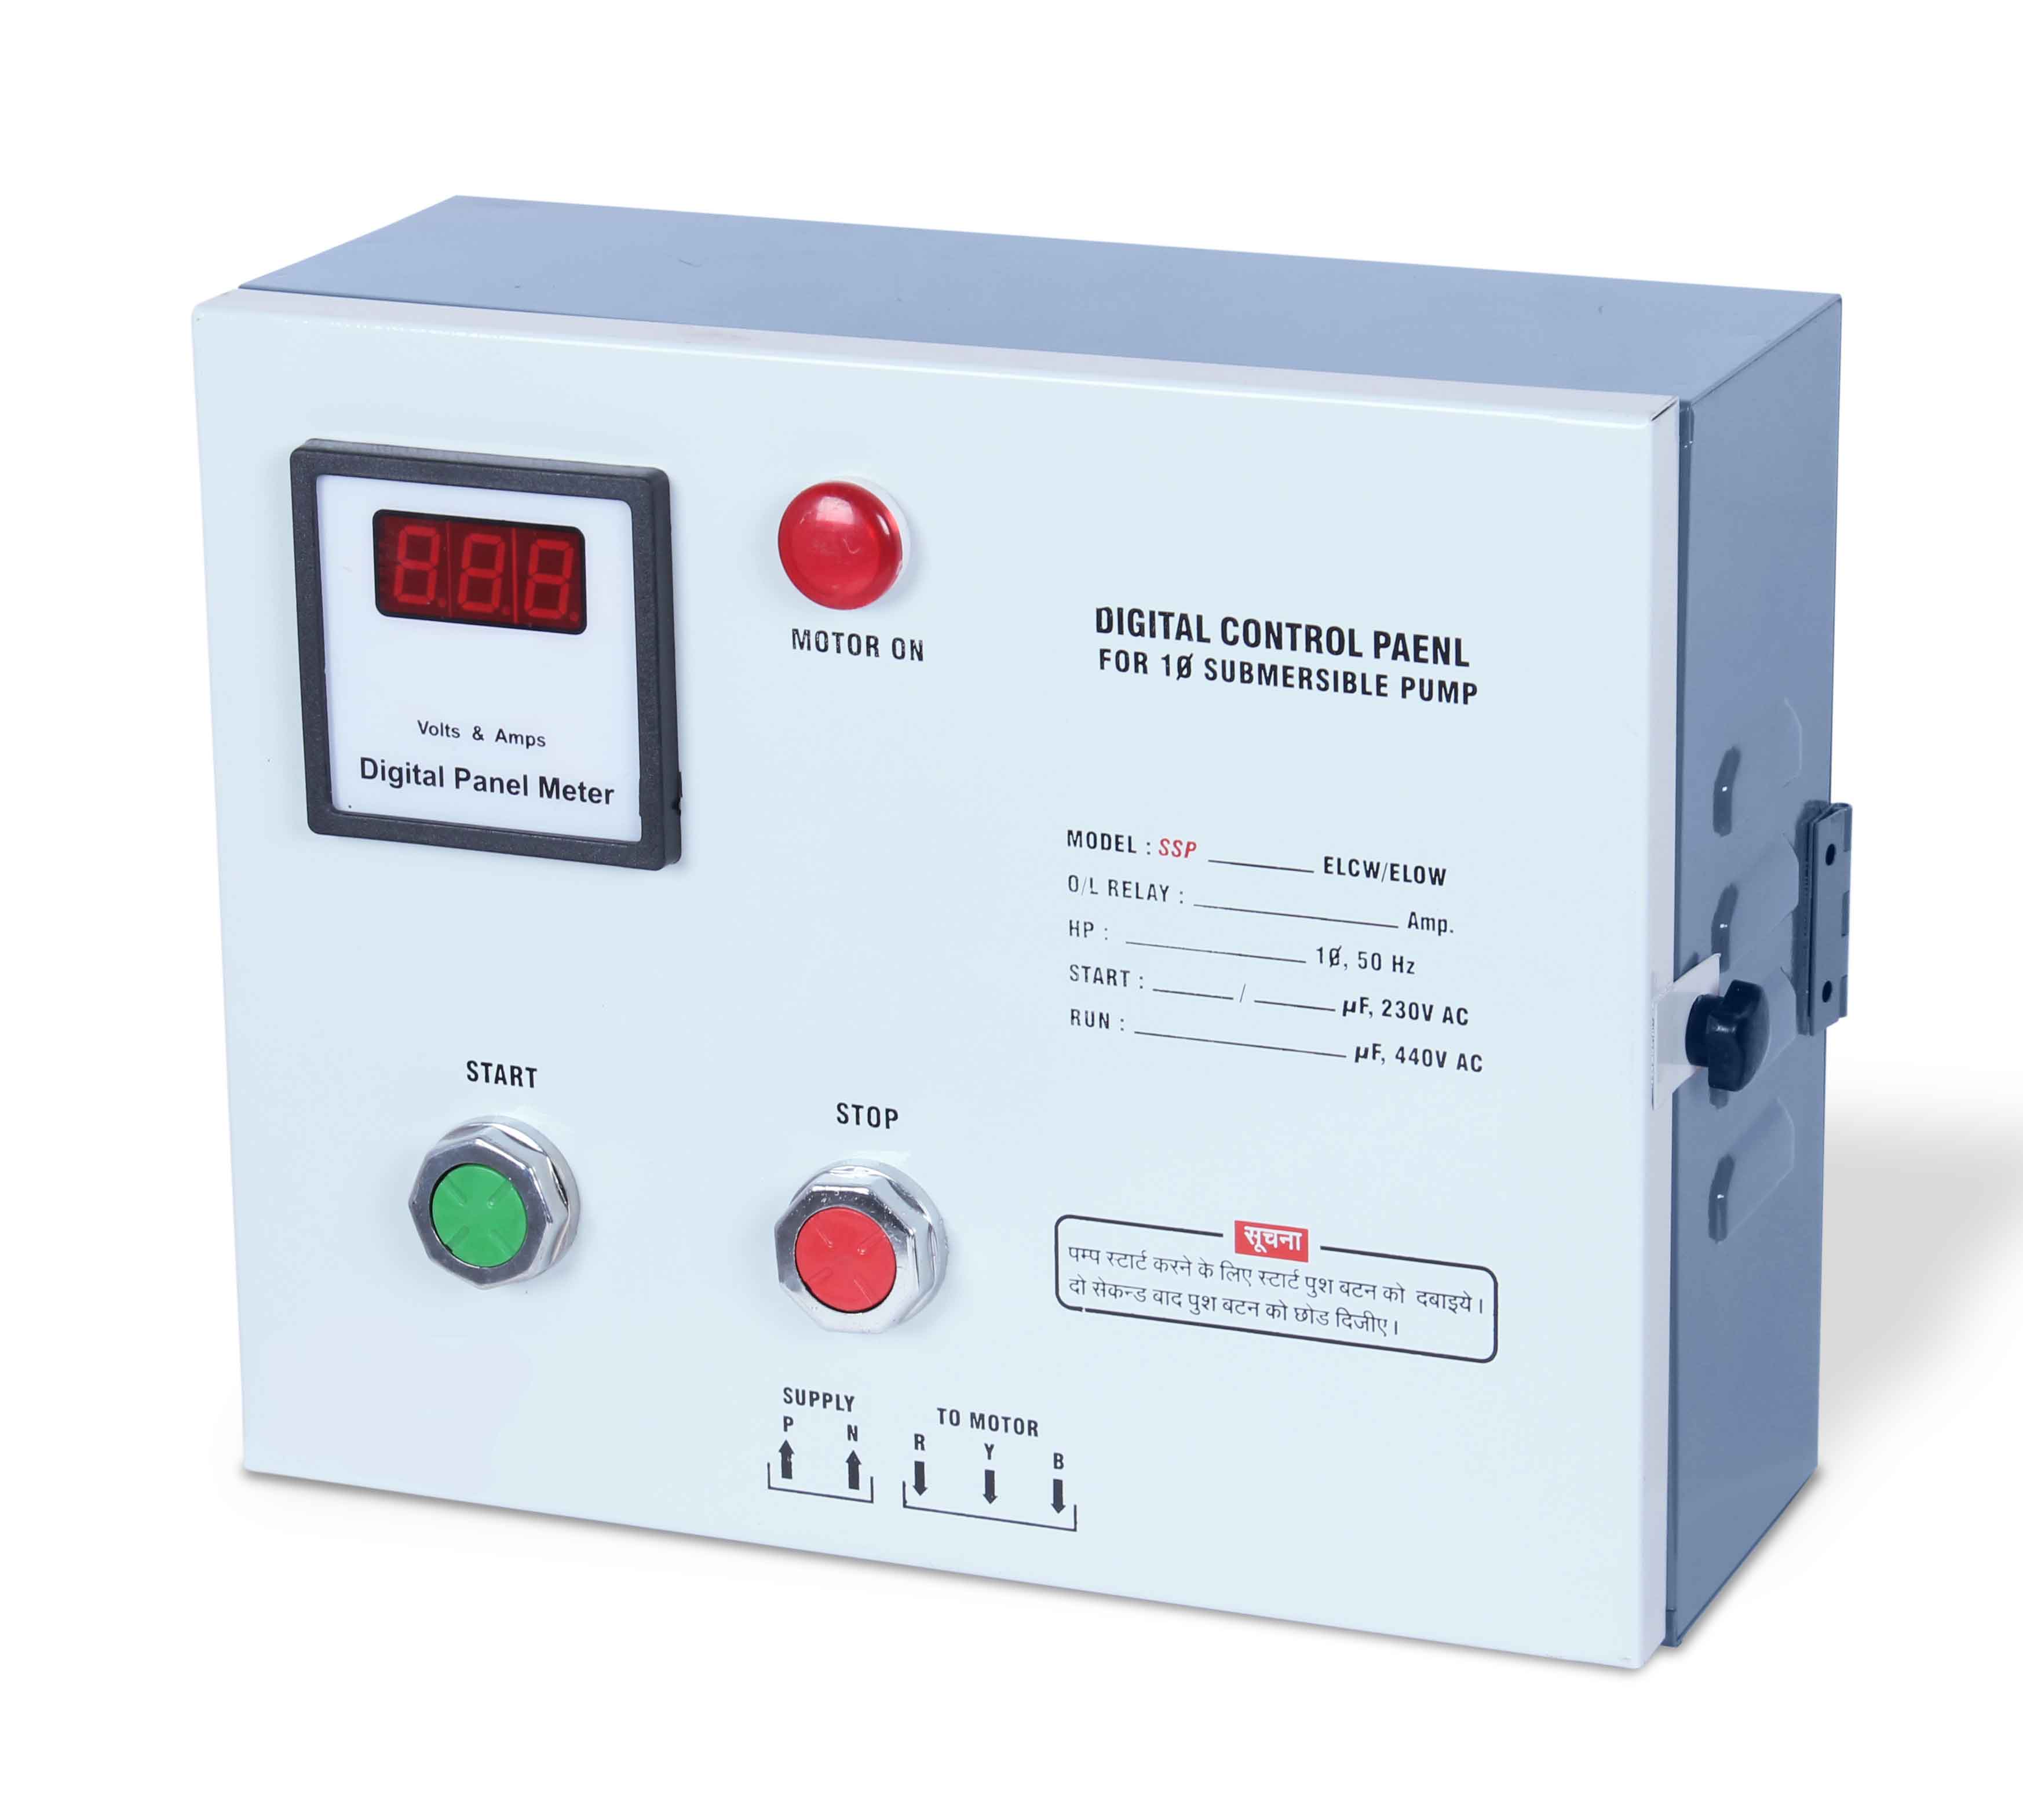 ELCW DIGI Single phase digital motor starter suitable for 3 HP submersible motor with overload protections by bi metallic relay